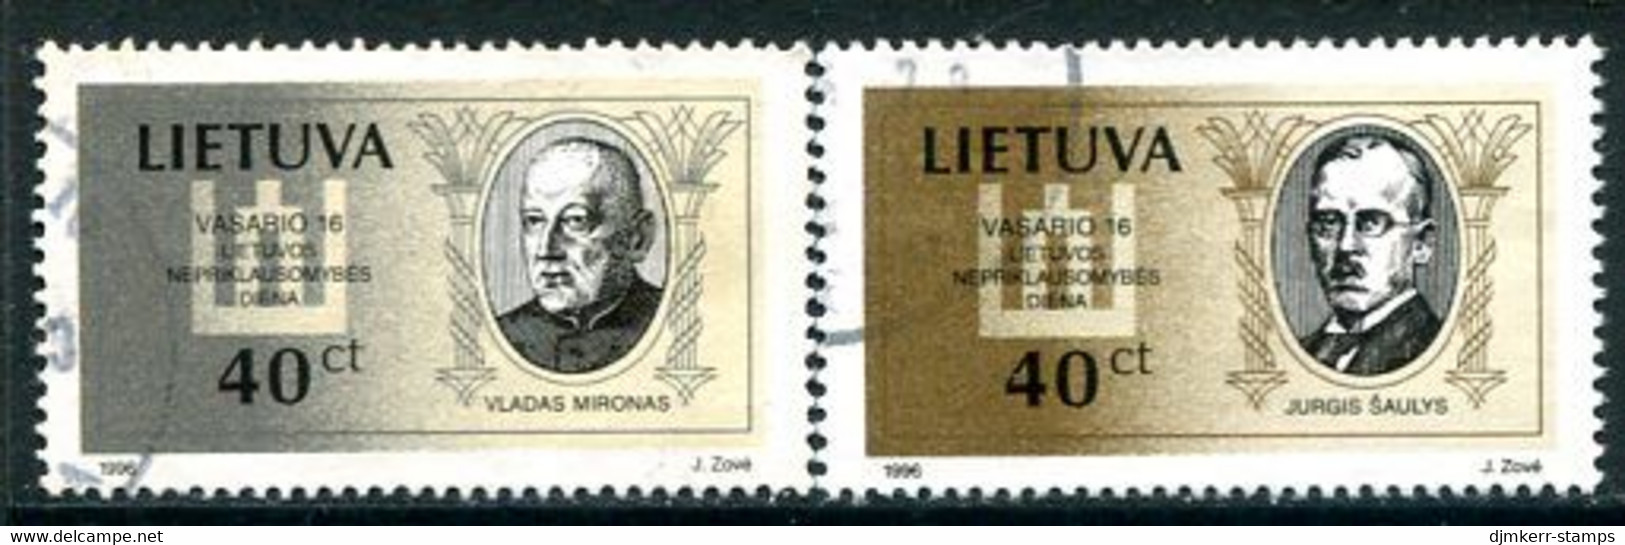 LITHUANIA 1996 Independence Day Used.  Michel 606-07 - Lituania